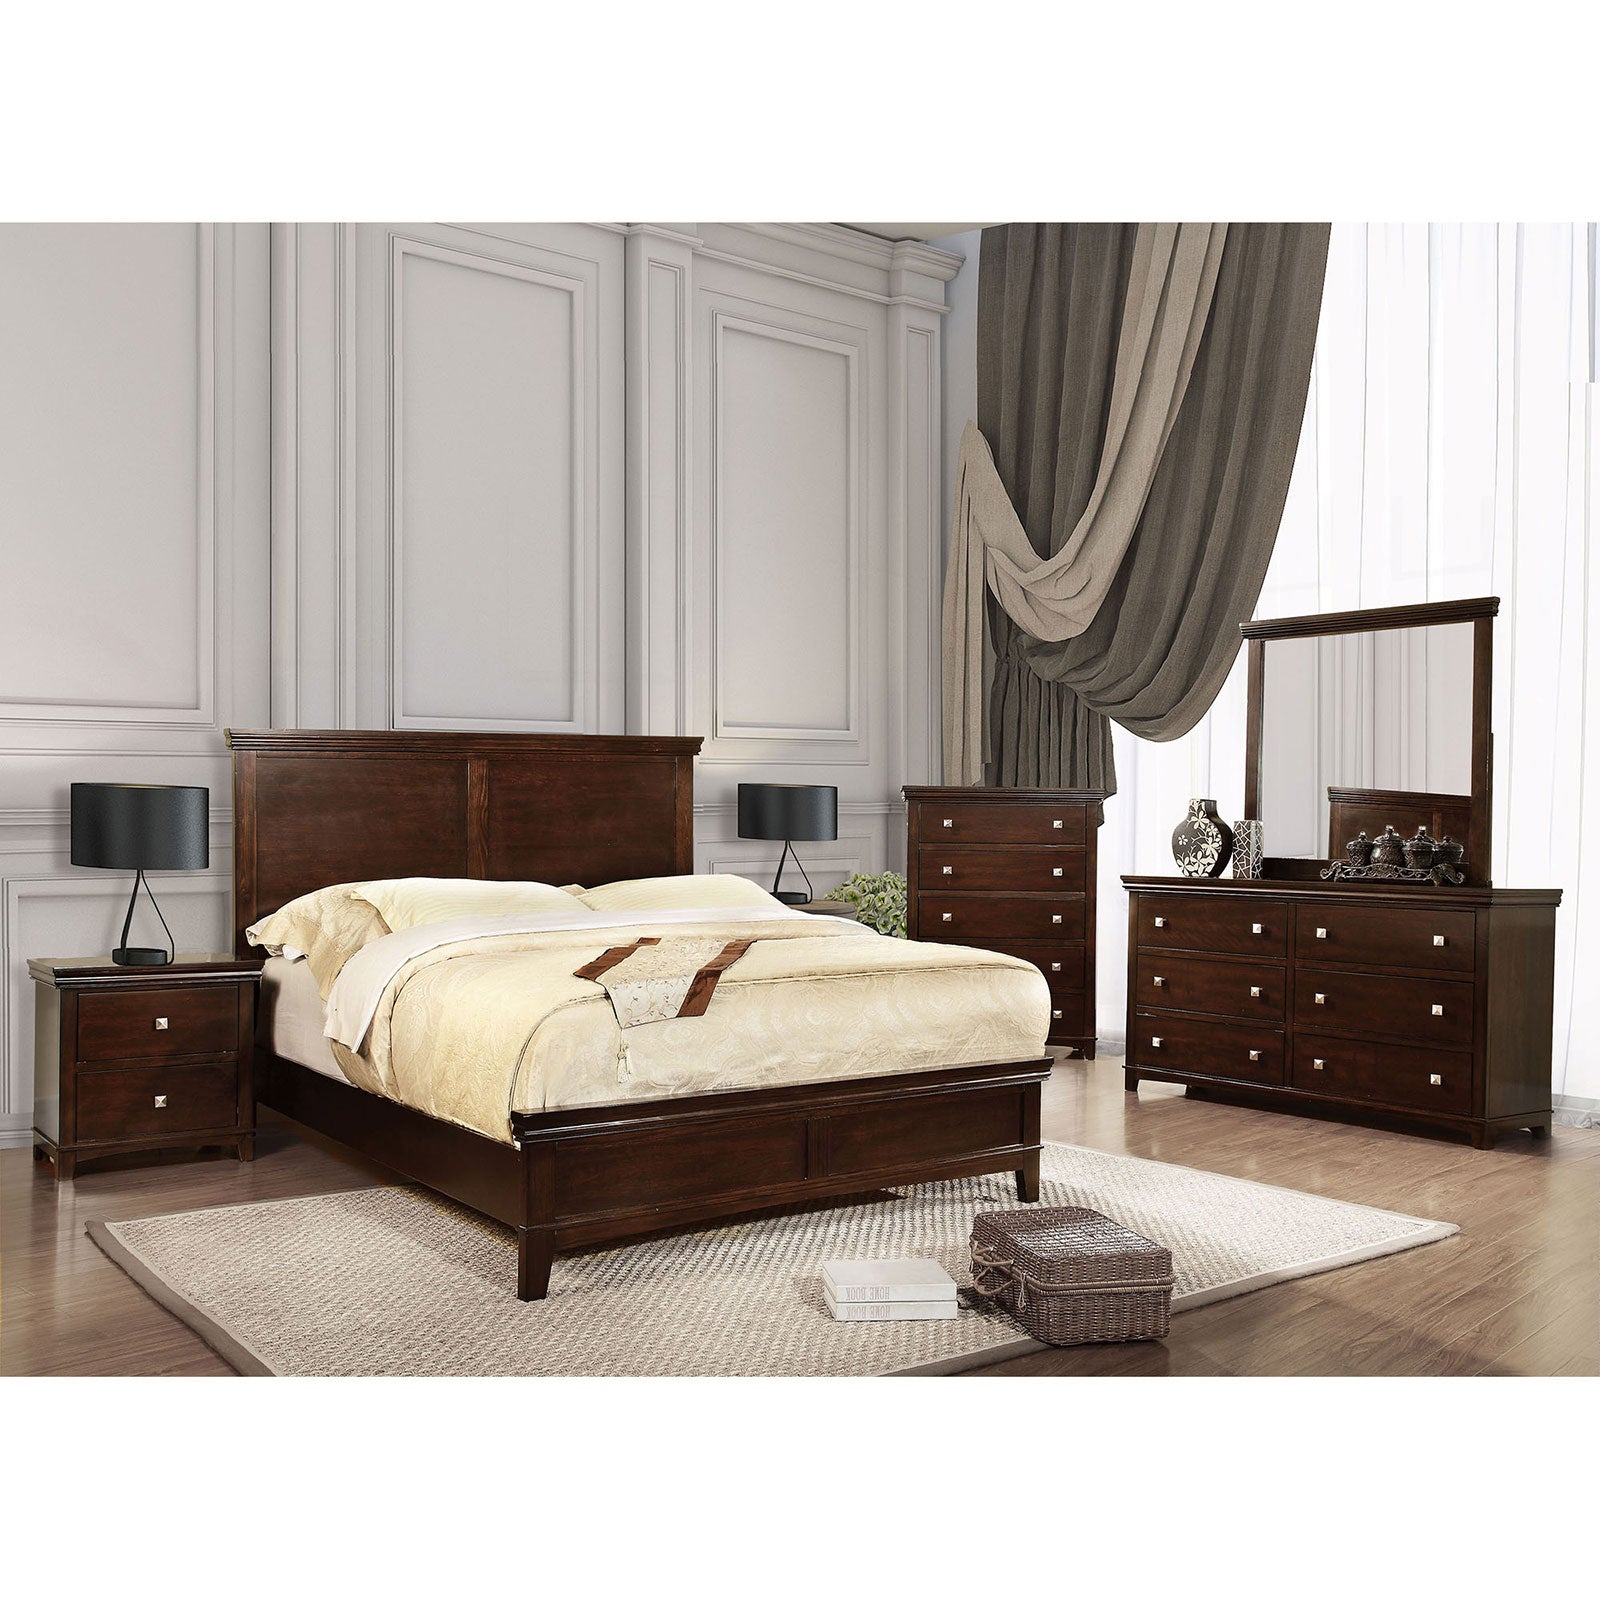 Spruce Brown Cherry 5 Pc. Queen Bedroom Set w/ Chest image